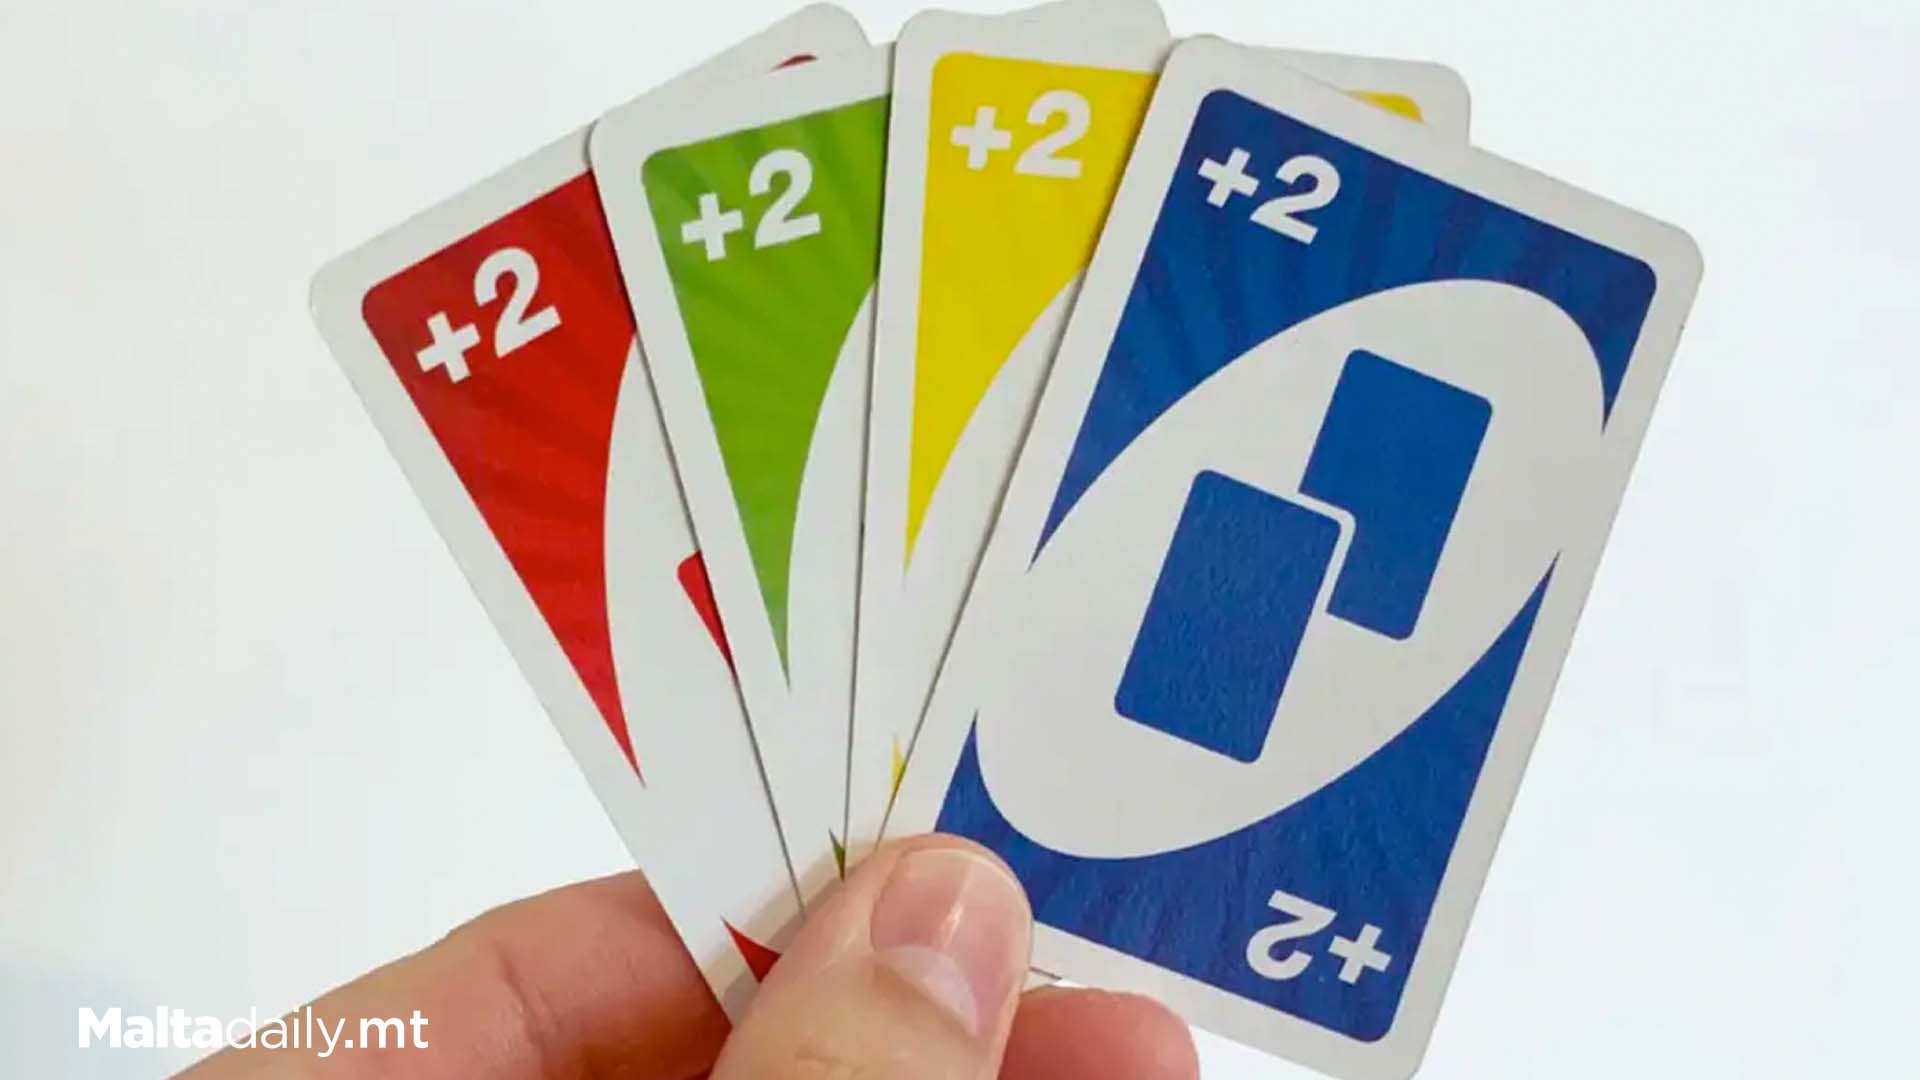 You Cannot Stack Draw 2 Cards On Each Other, UNO Says